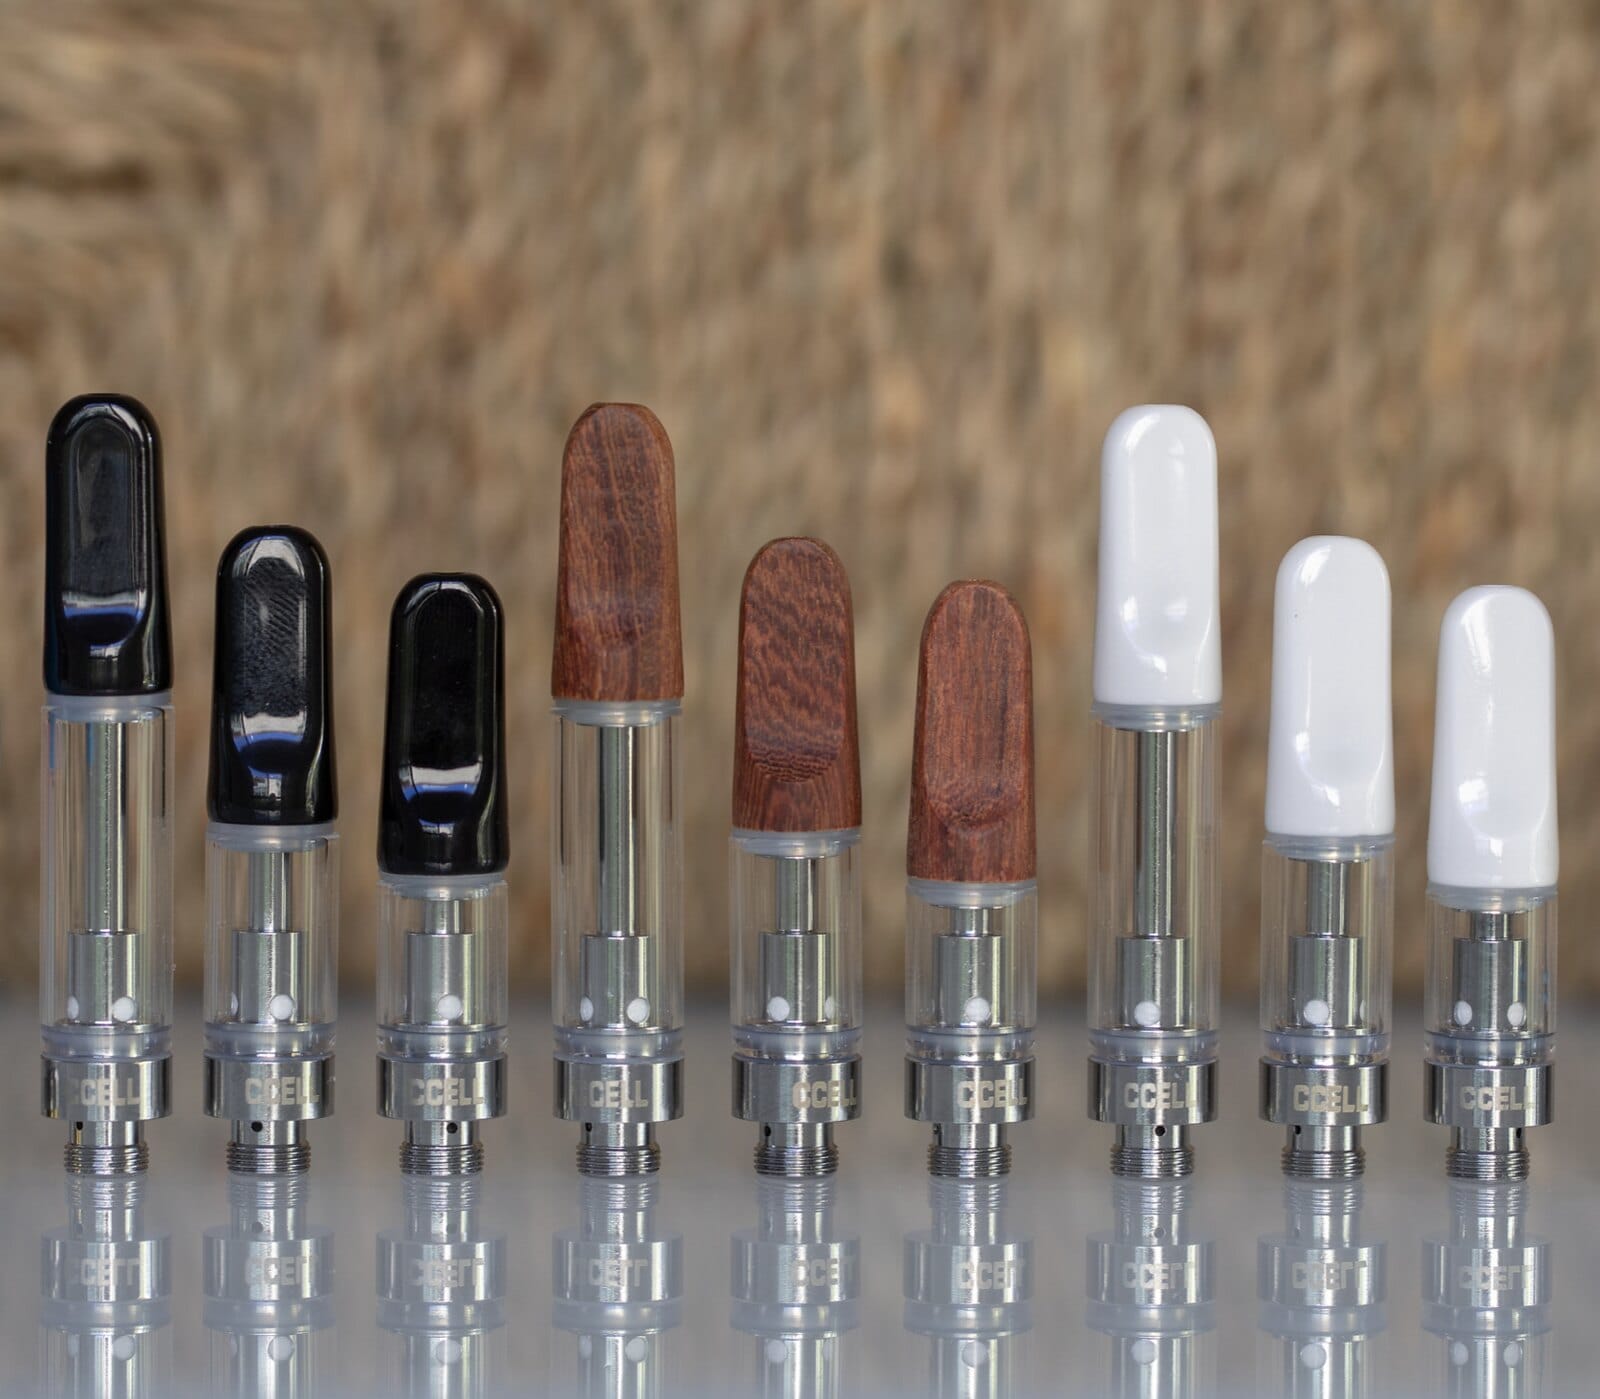 CCell TH2 oil cartridge options